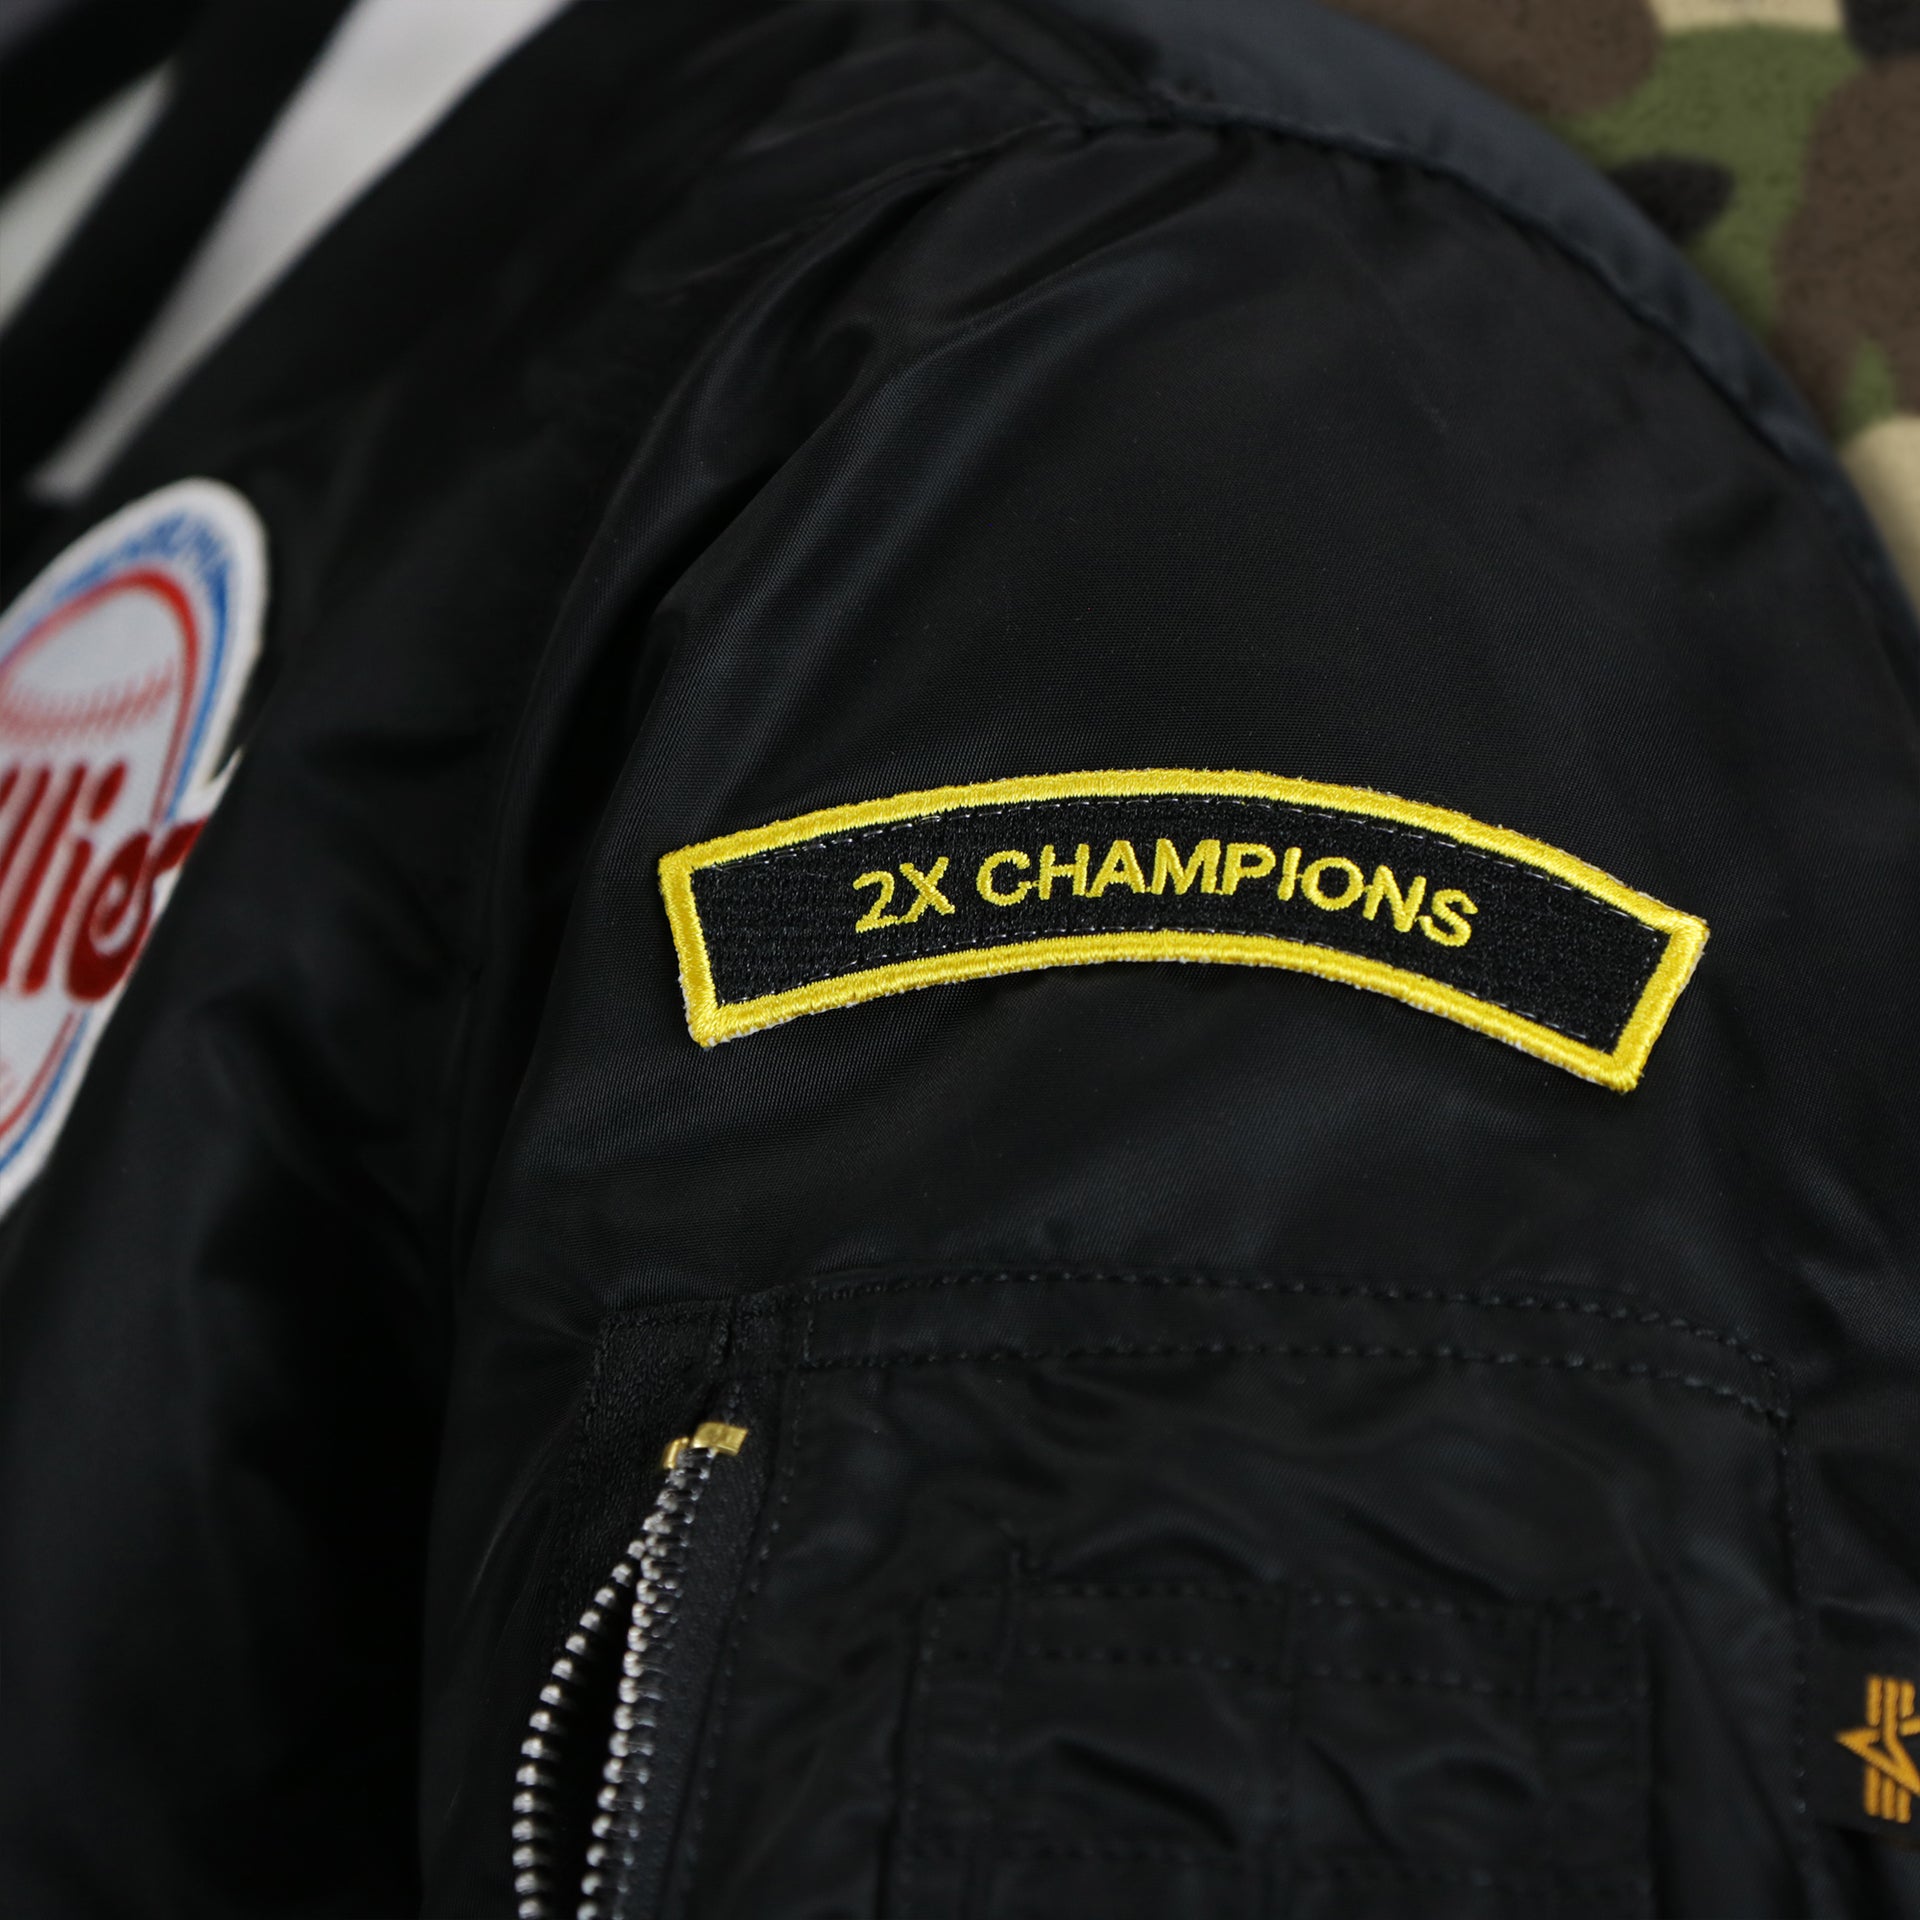 The 2x Champions Side Patch on the Cooperstown Philadelphia Phillies MLB Patch Alpha Industries Reversible Bomber Jacket With Camo Liner | Black Bomber Jacket